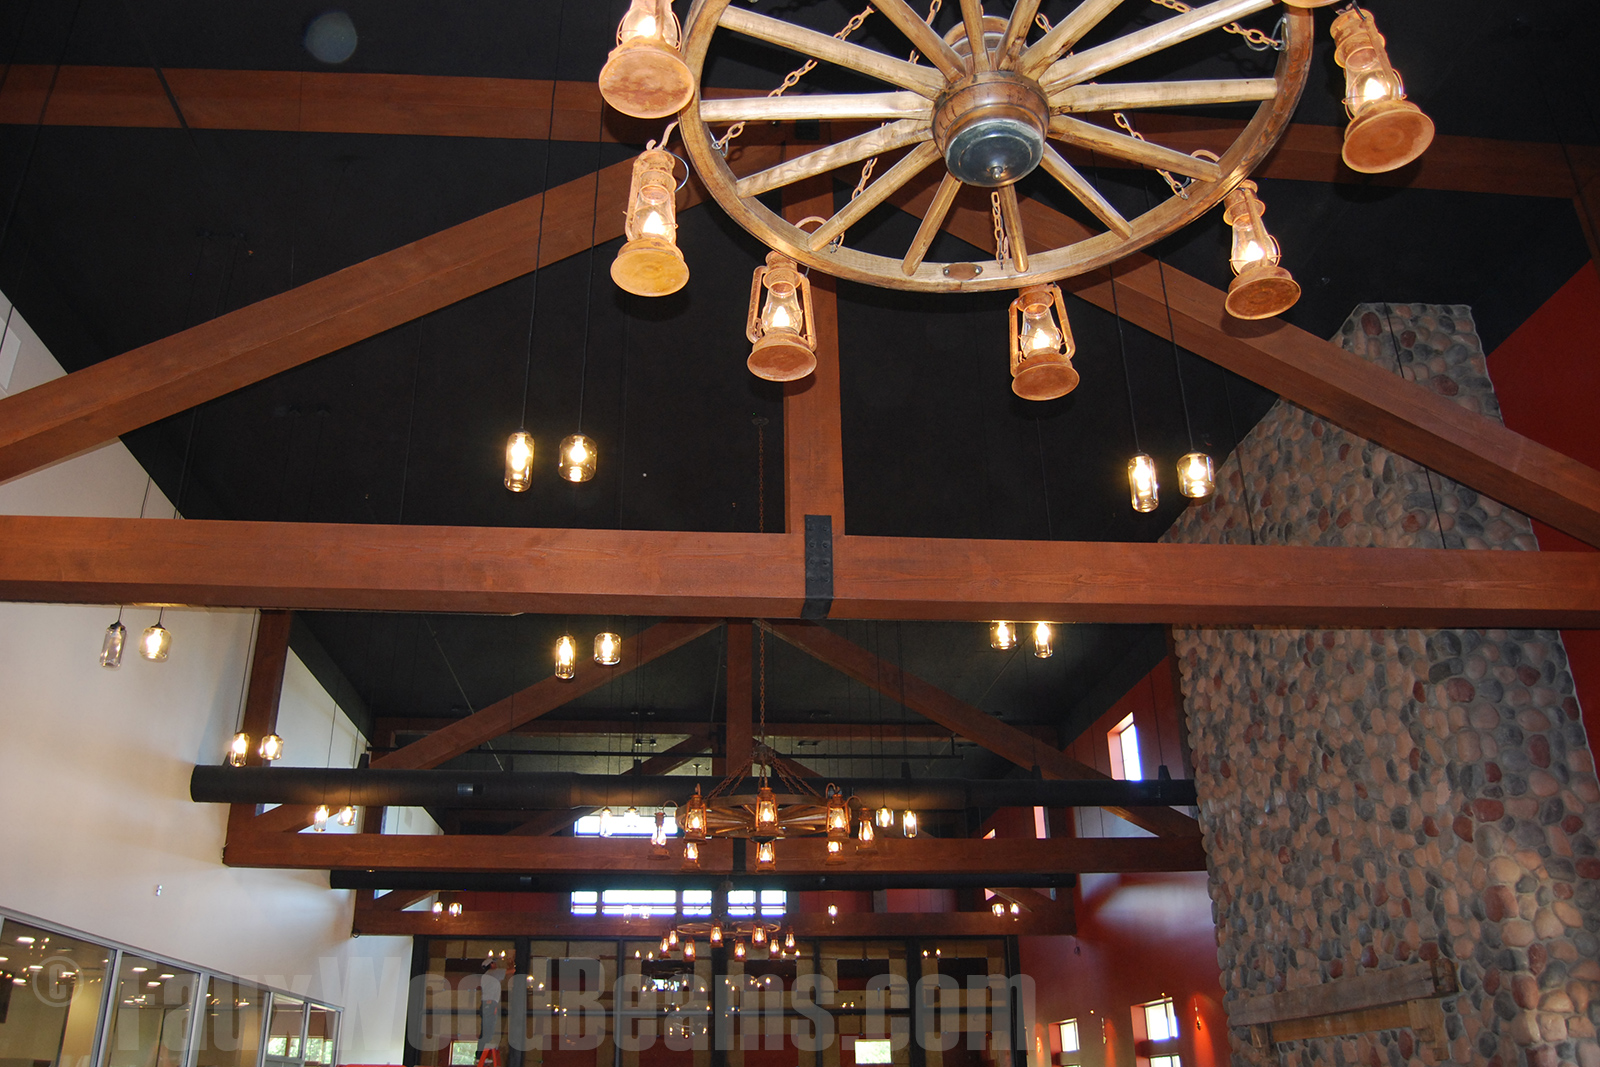 Decorative Trusses And Lamps